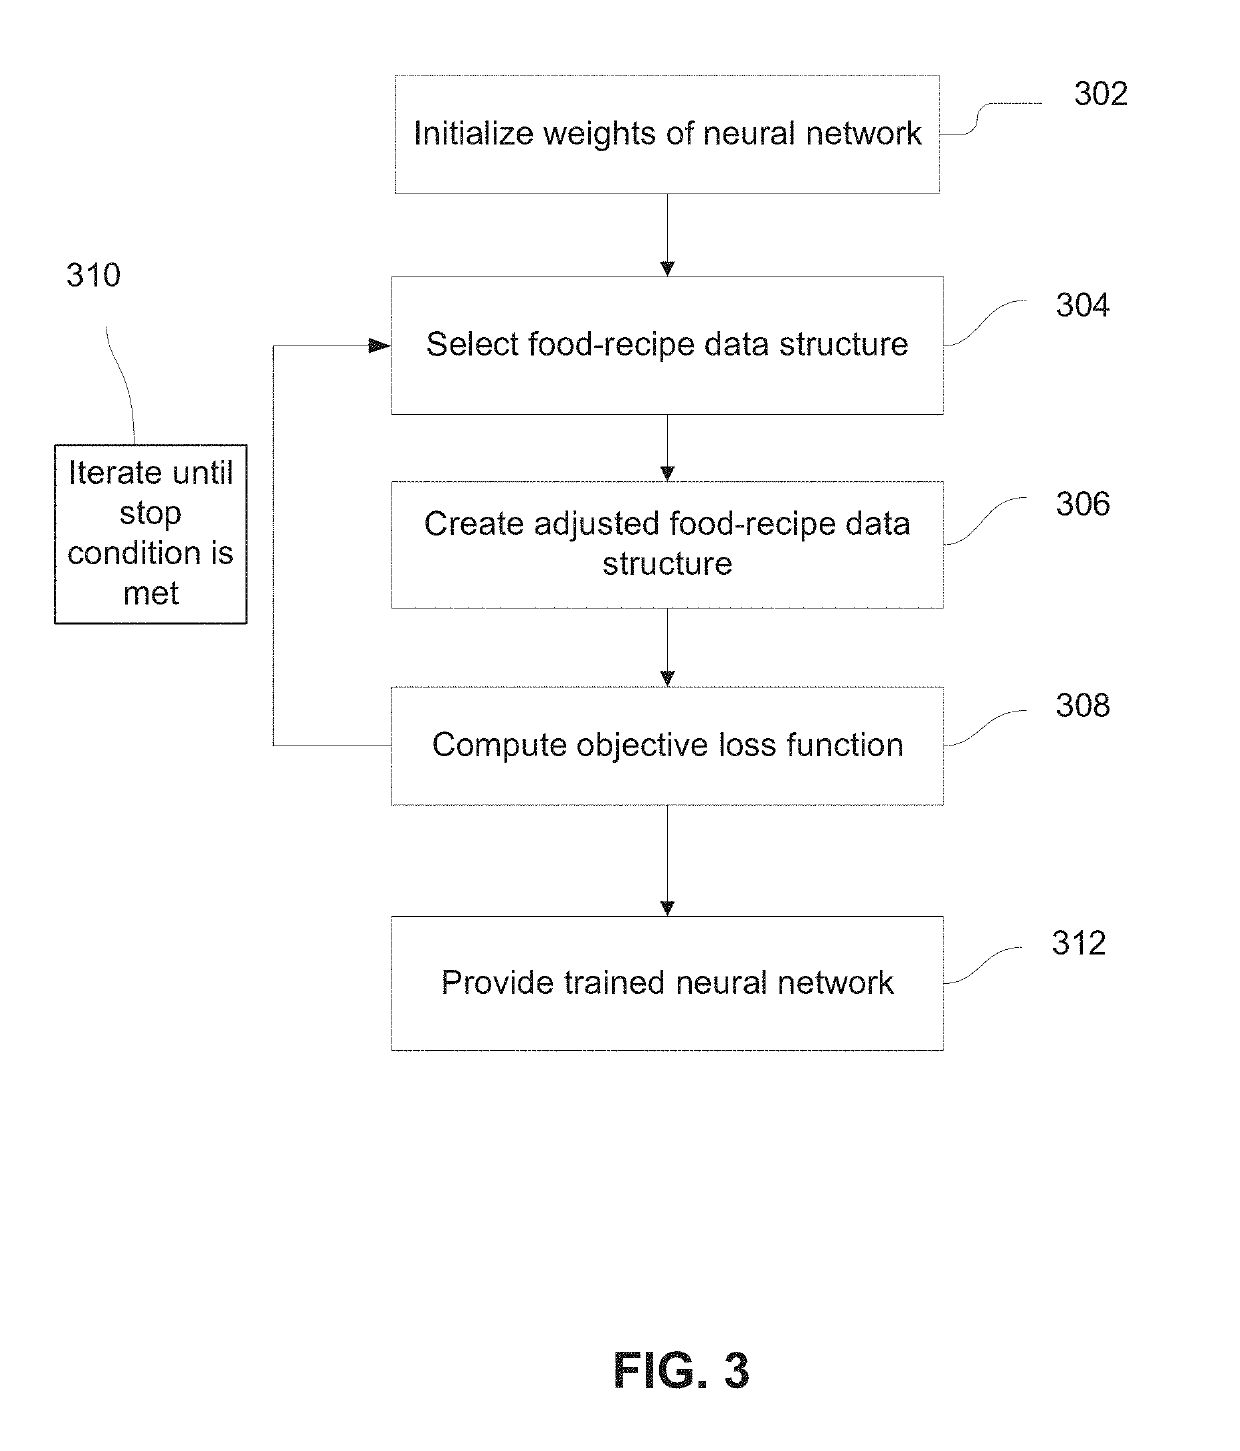 Systems and methods for automatic analysis of text-based food-recipes